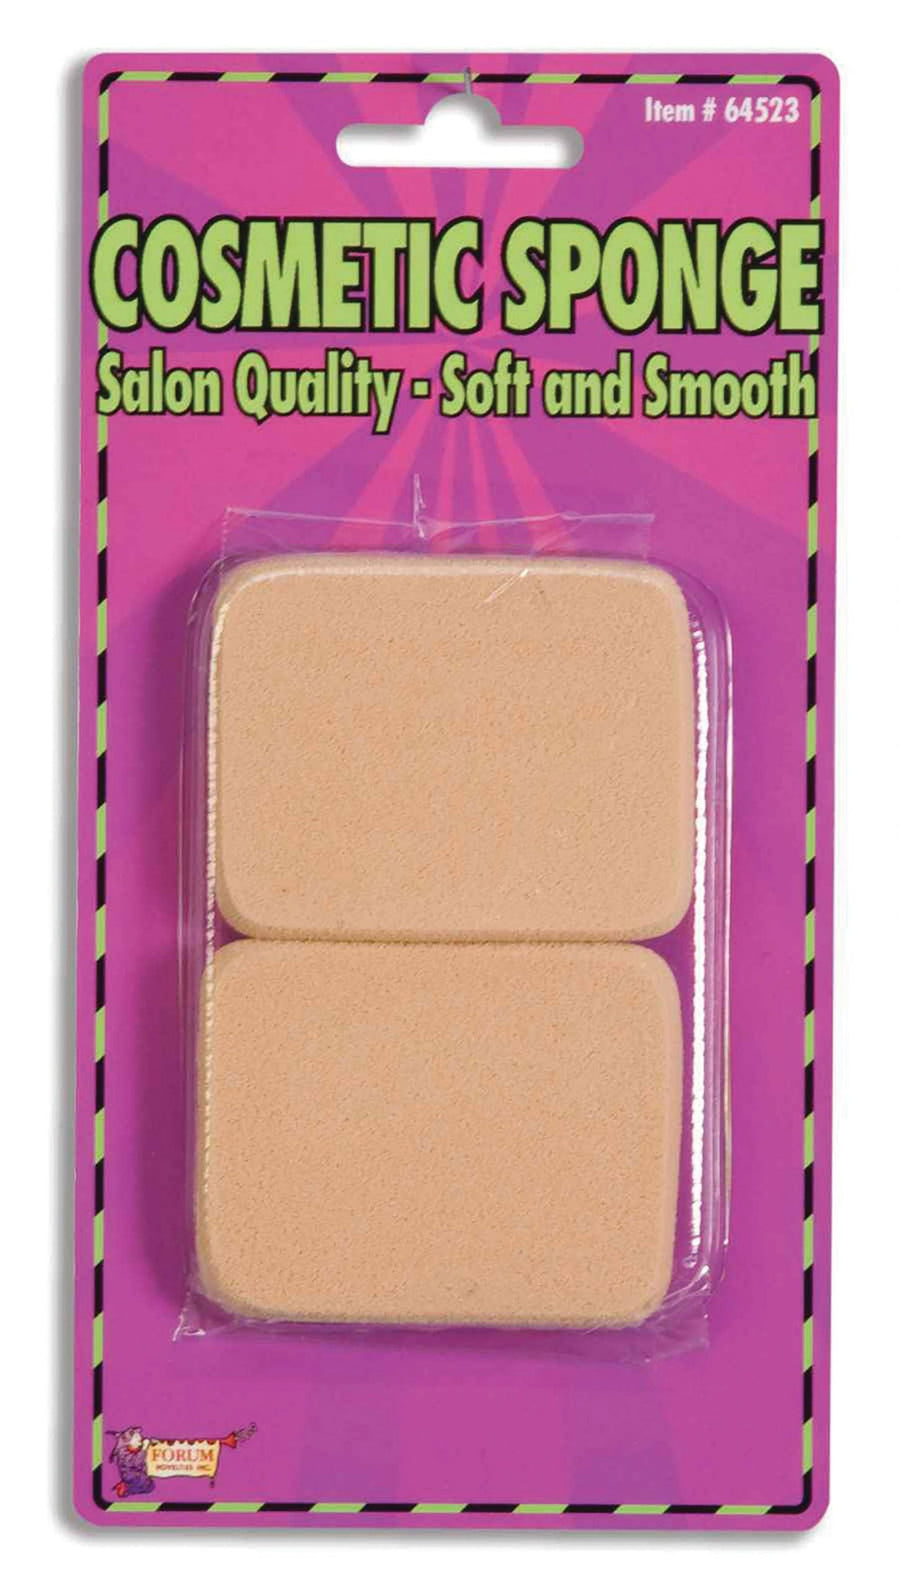 Cosmetic Sponges 2 Pack Make Up Applicator Pads_1